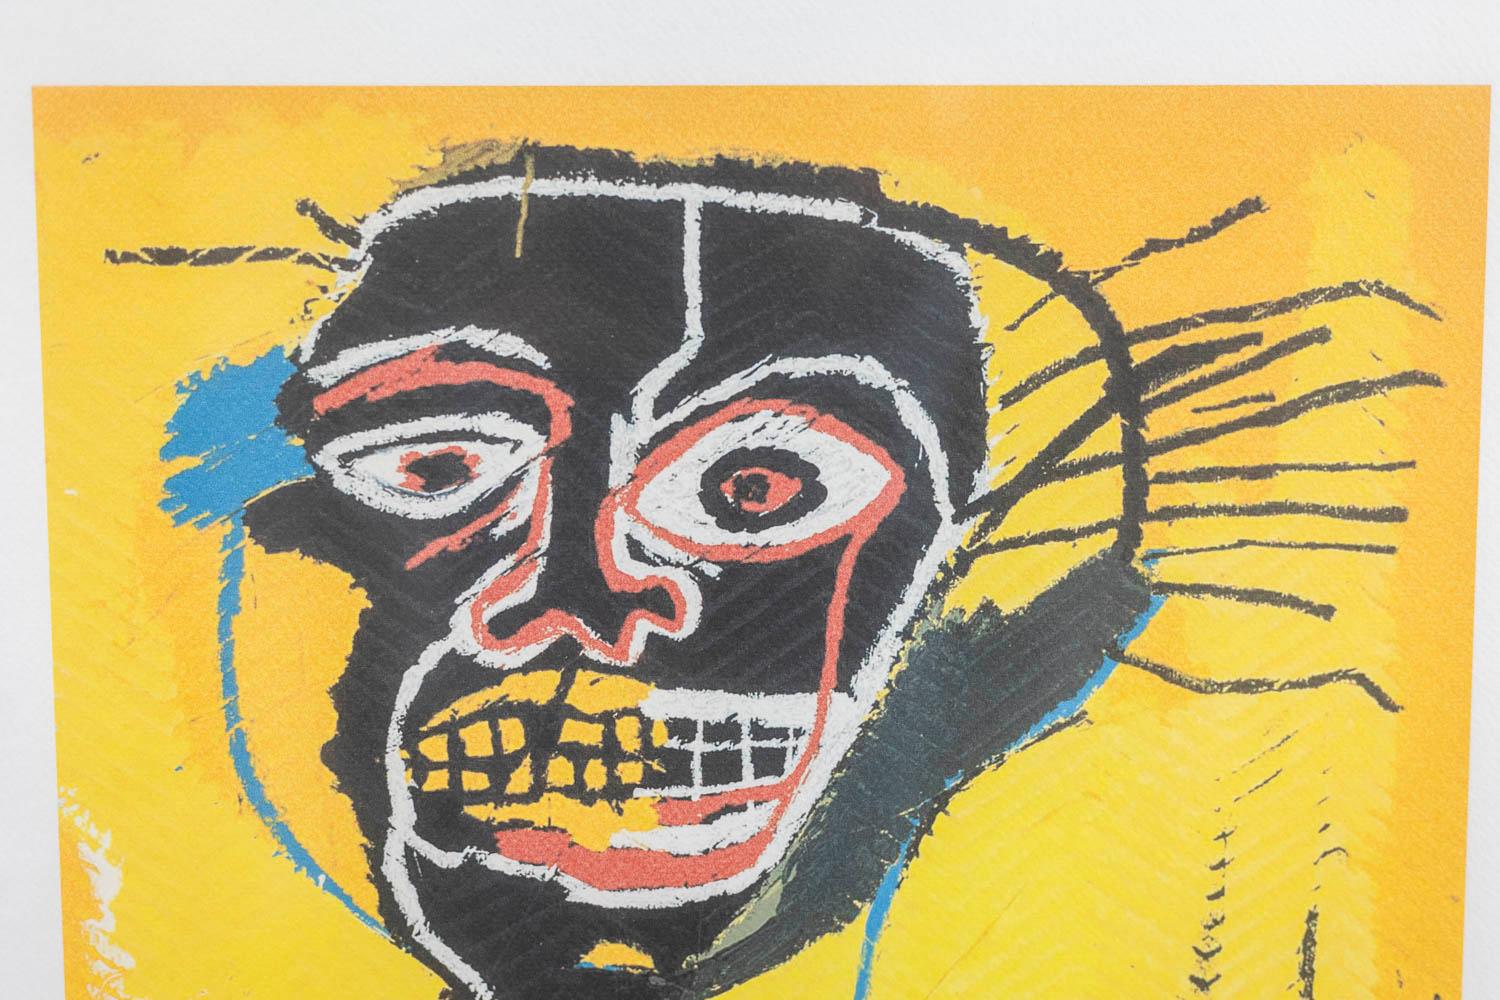 Jean-Michel Basquiat, signed and numbered.

